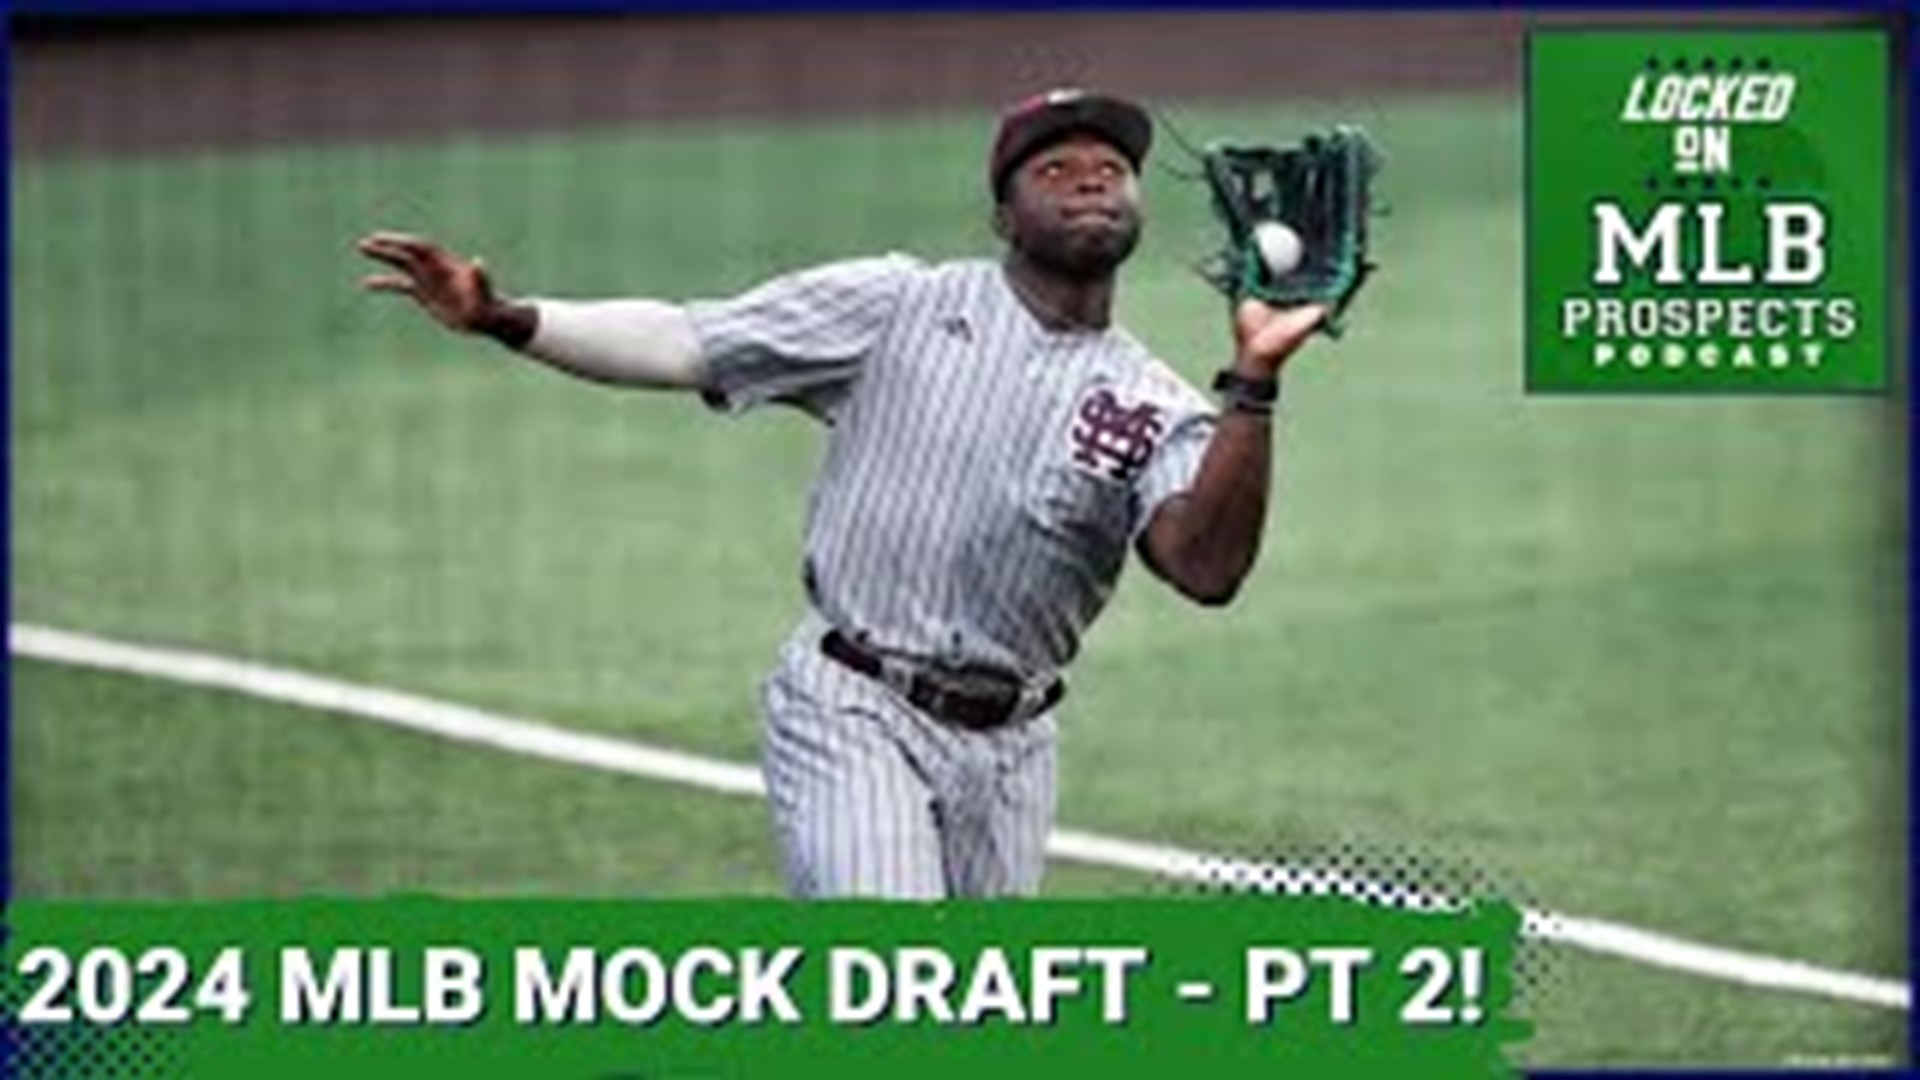 Wrapping up our first post-lottery mock draft, let's talk about the back half of the first round. Starting at pick 21, Lindsay and guest Greg Zumach.